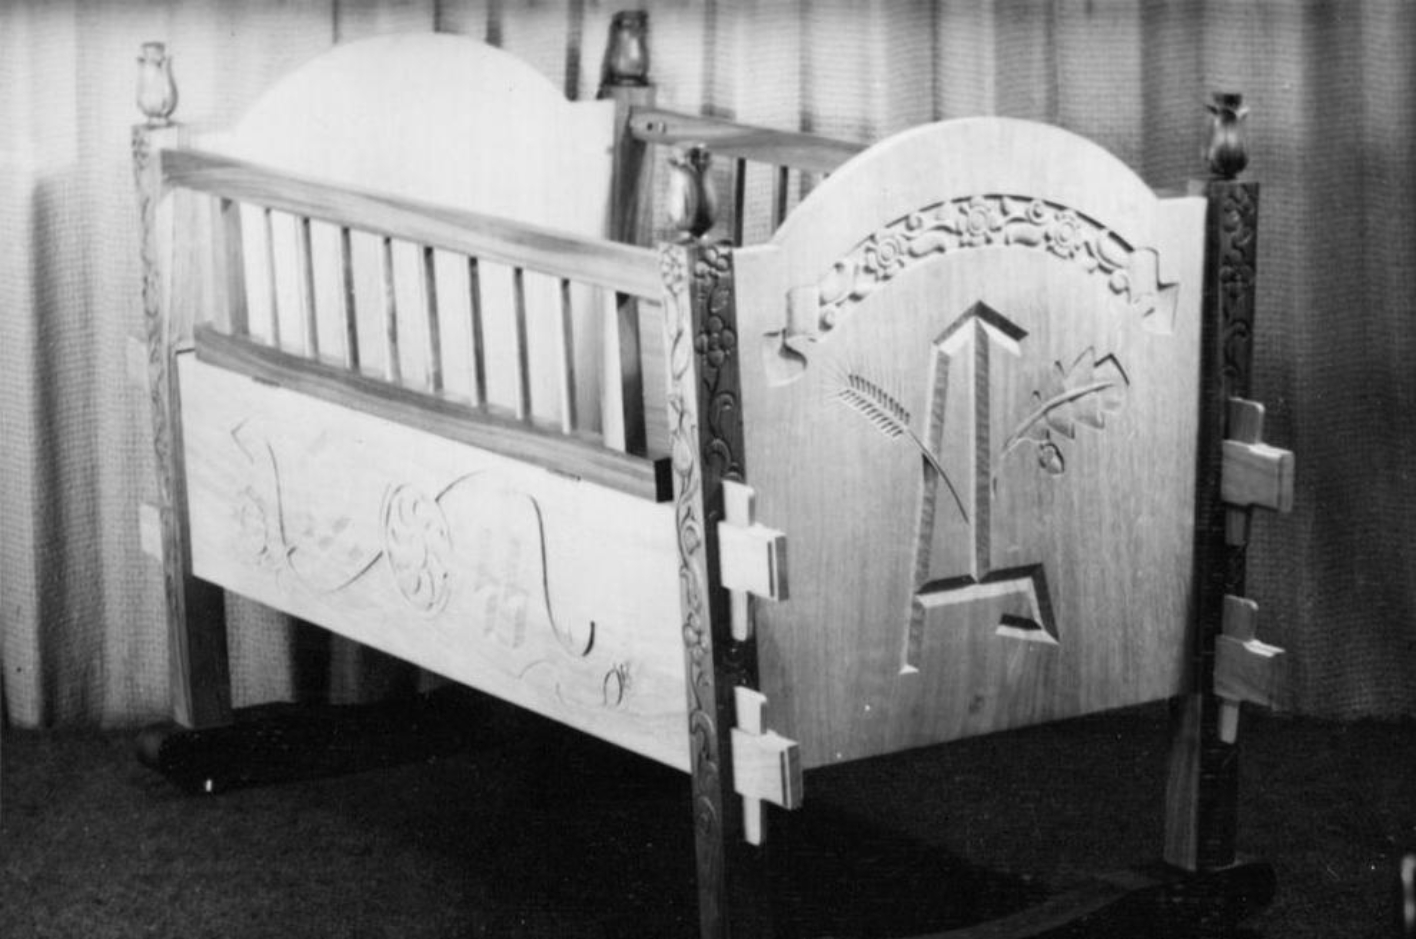 A child's cradle decorated with hand carvings. The cradle is set in scene with view fraom the right on the decorated front and side walls.